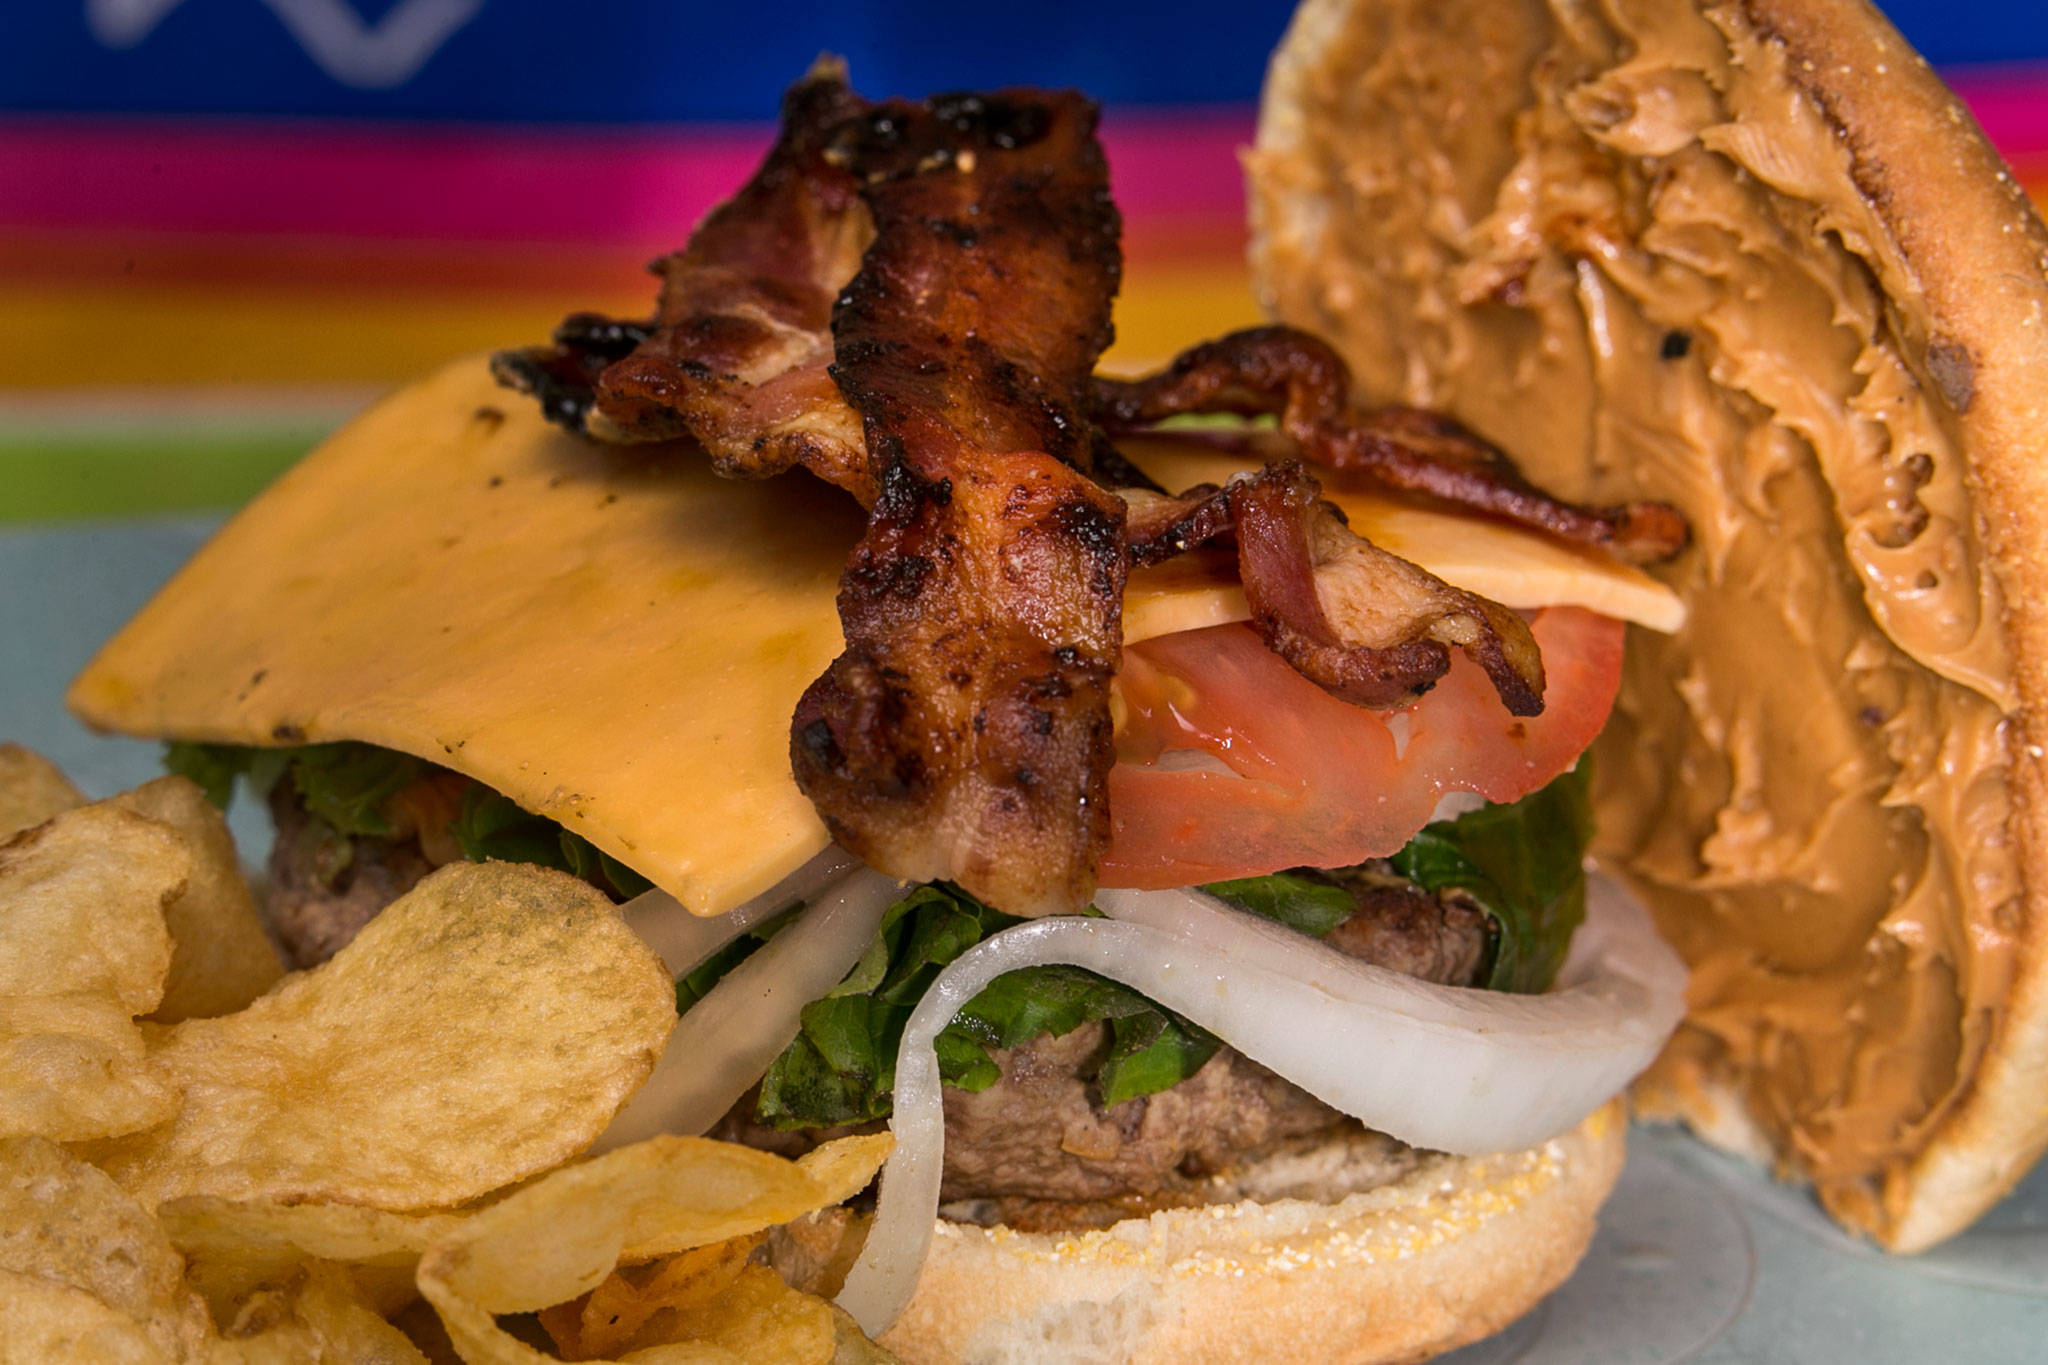 Peanut butter burger with lettuce, onions, tomatoes and peanut butter as a spread. (Kevin Clark / The Herald)